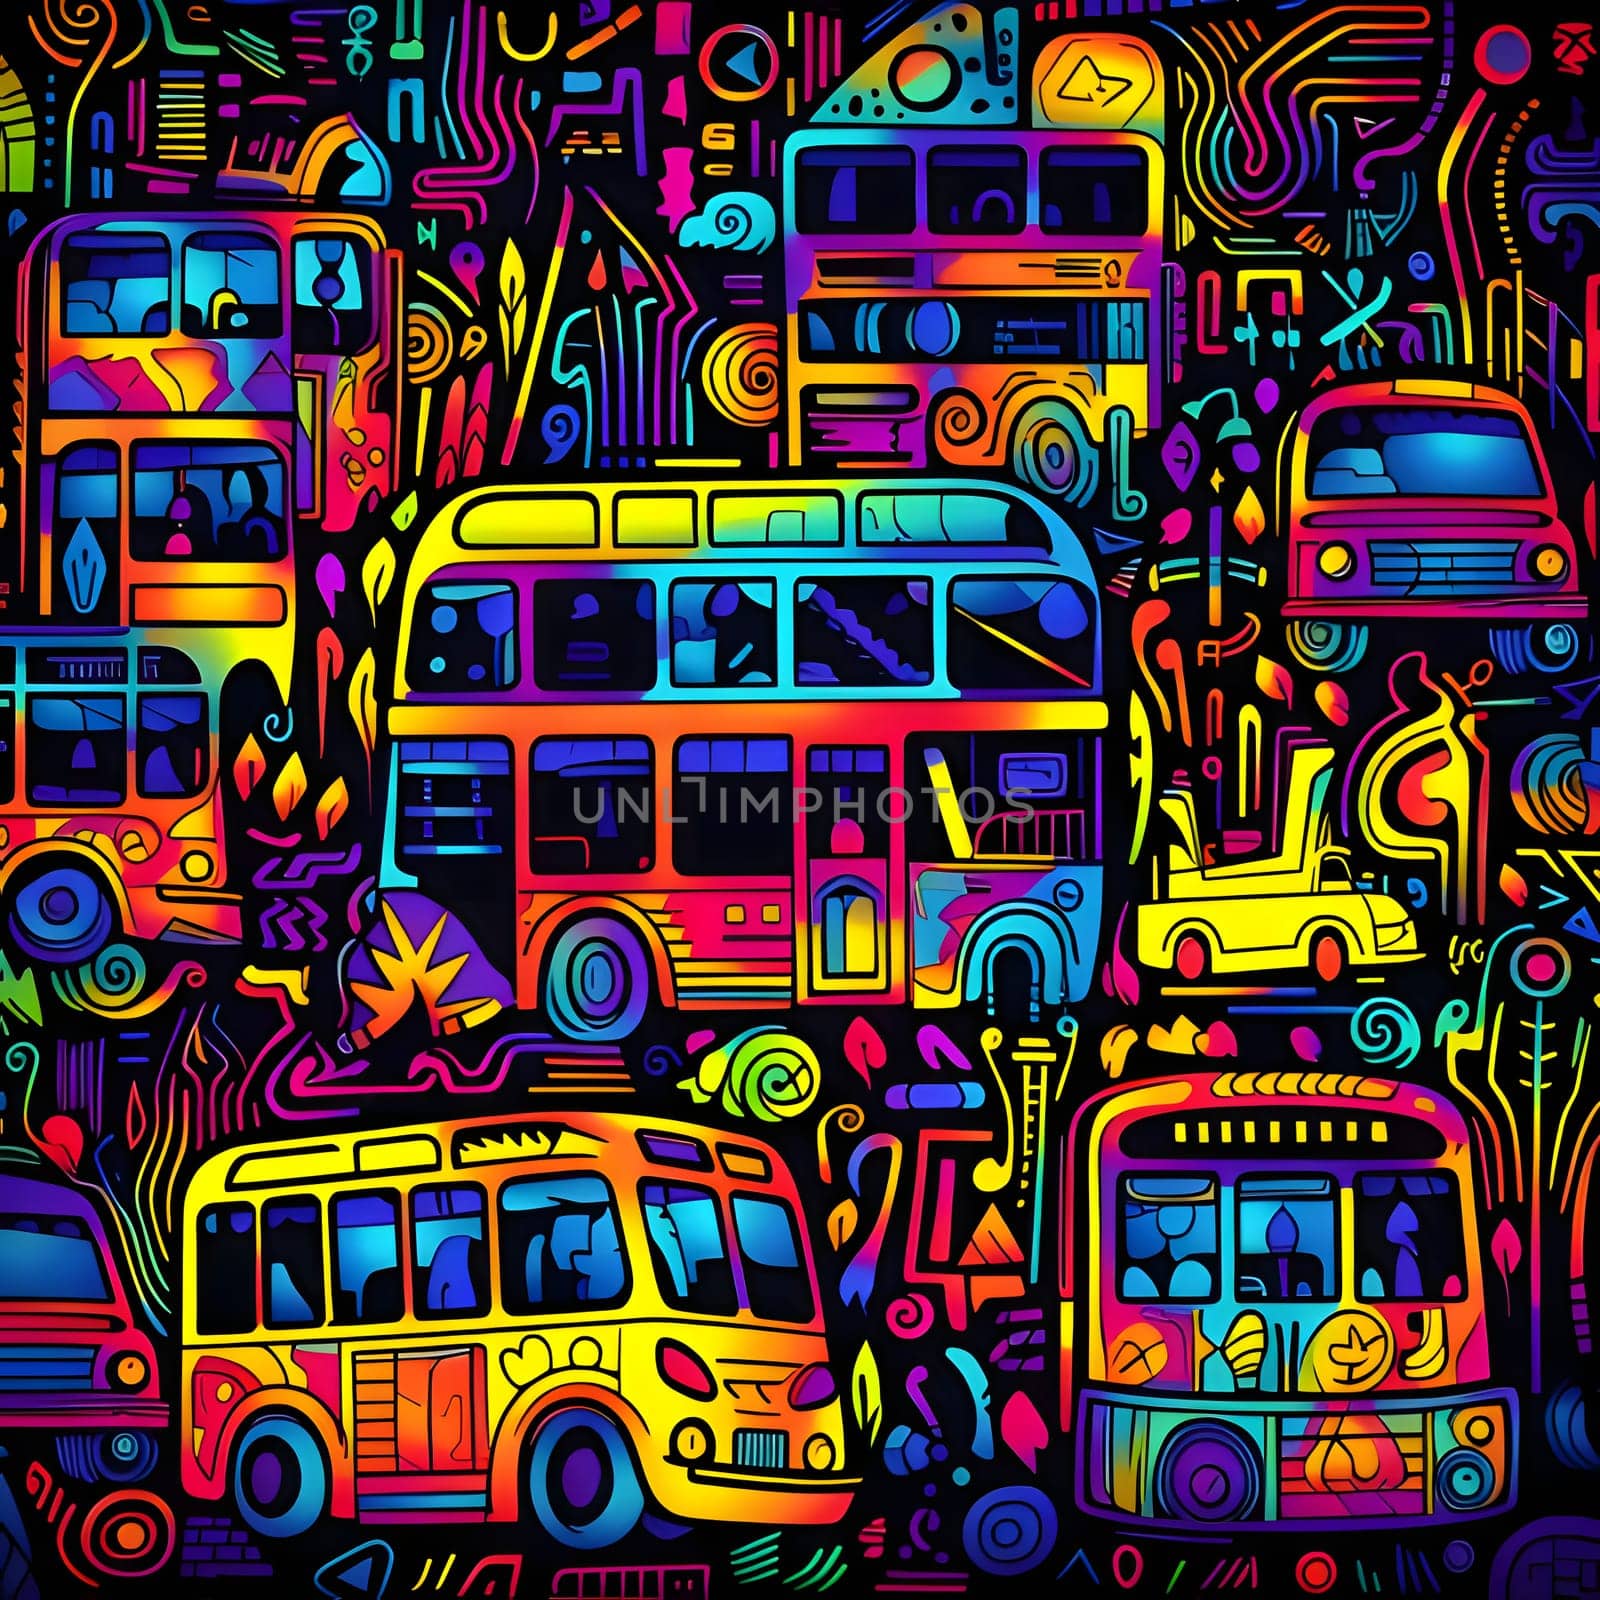 Patterns and banners backgrounds: City bus seamless pattern. Hand drawn vector illustration in cartoon style.